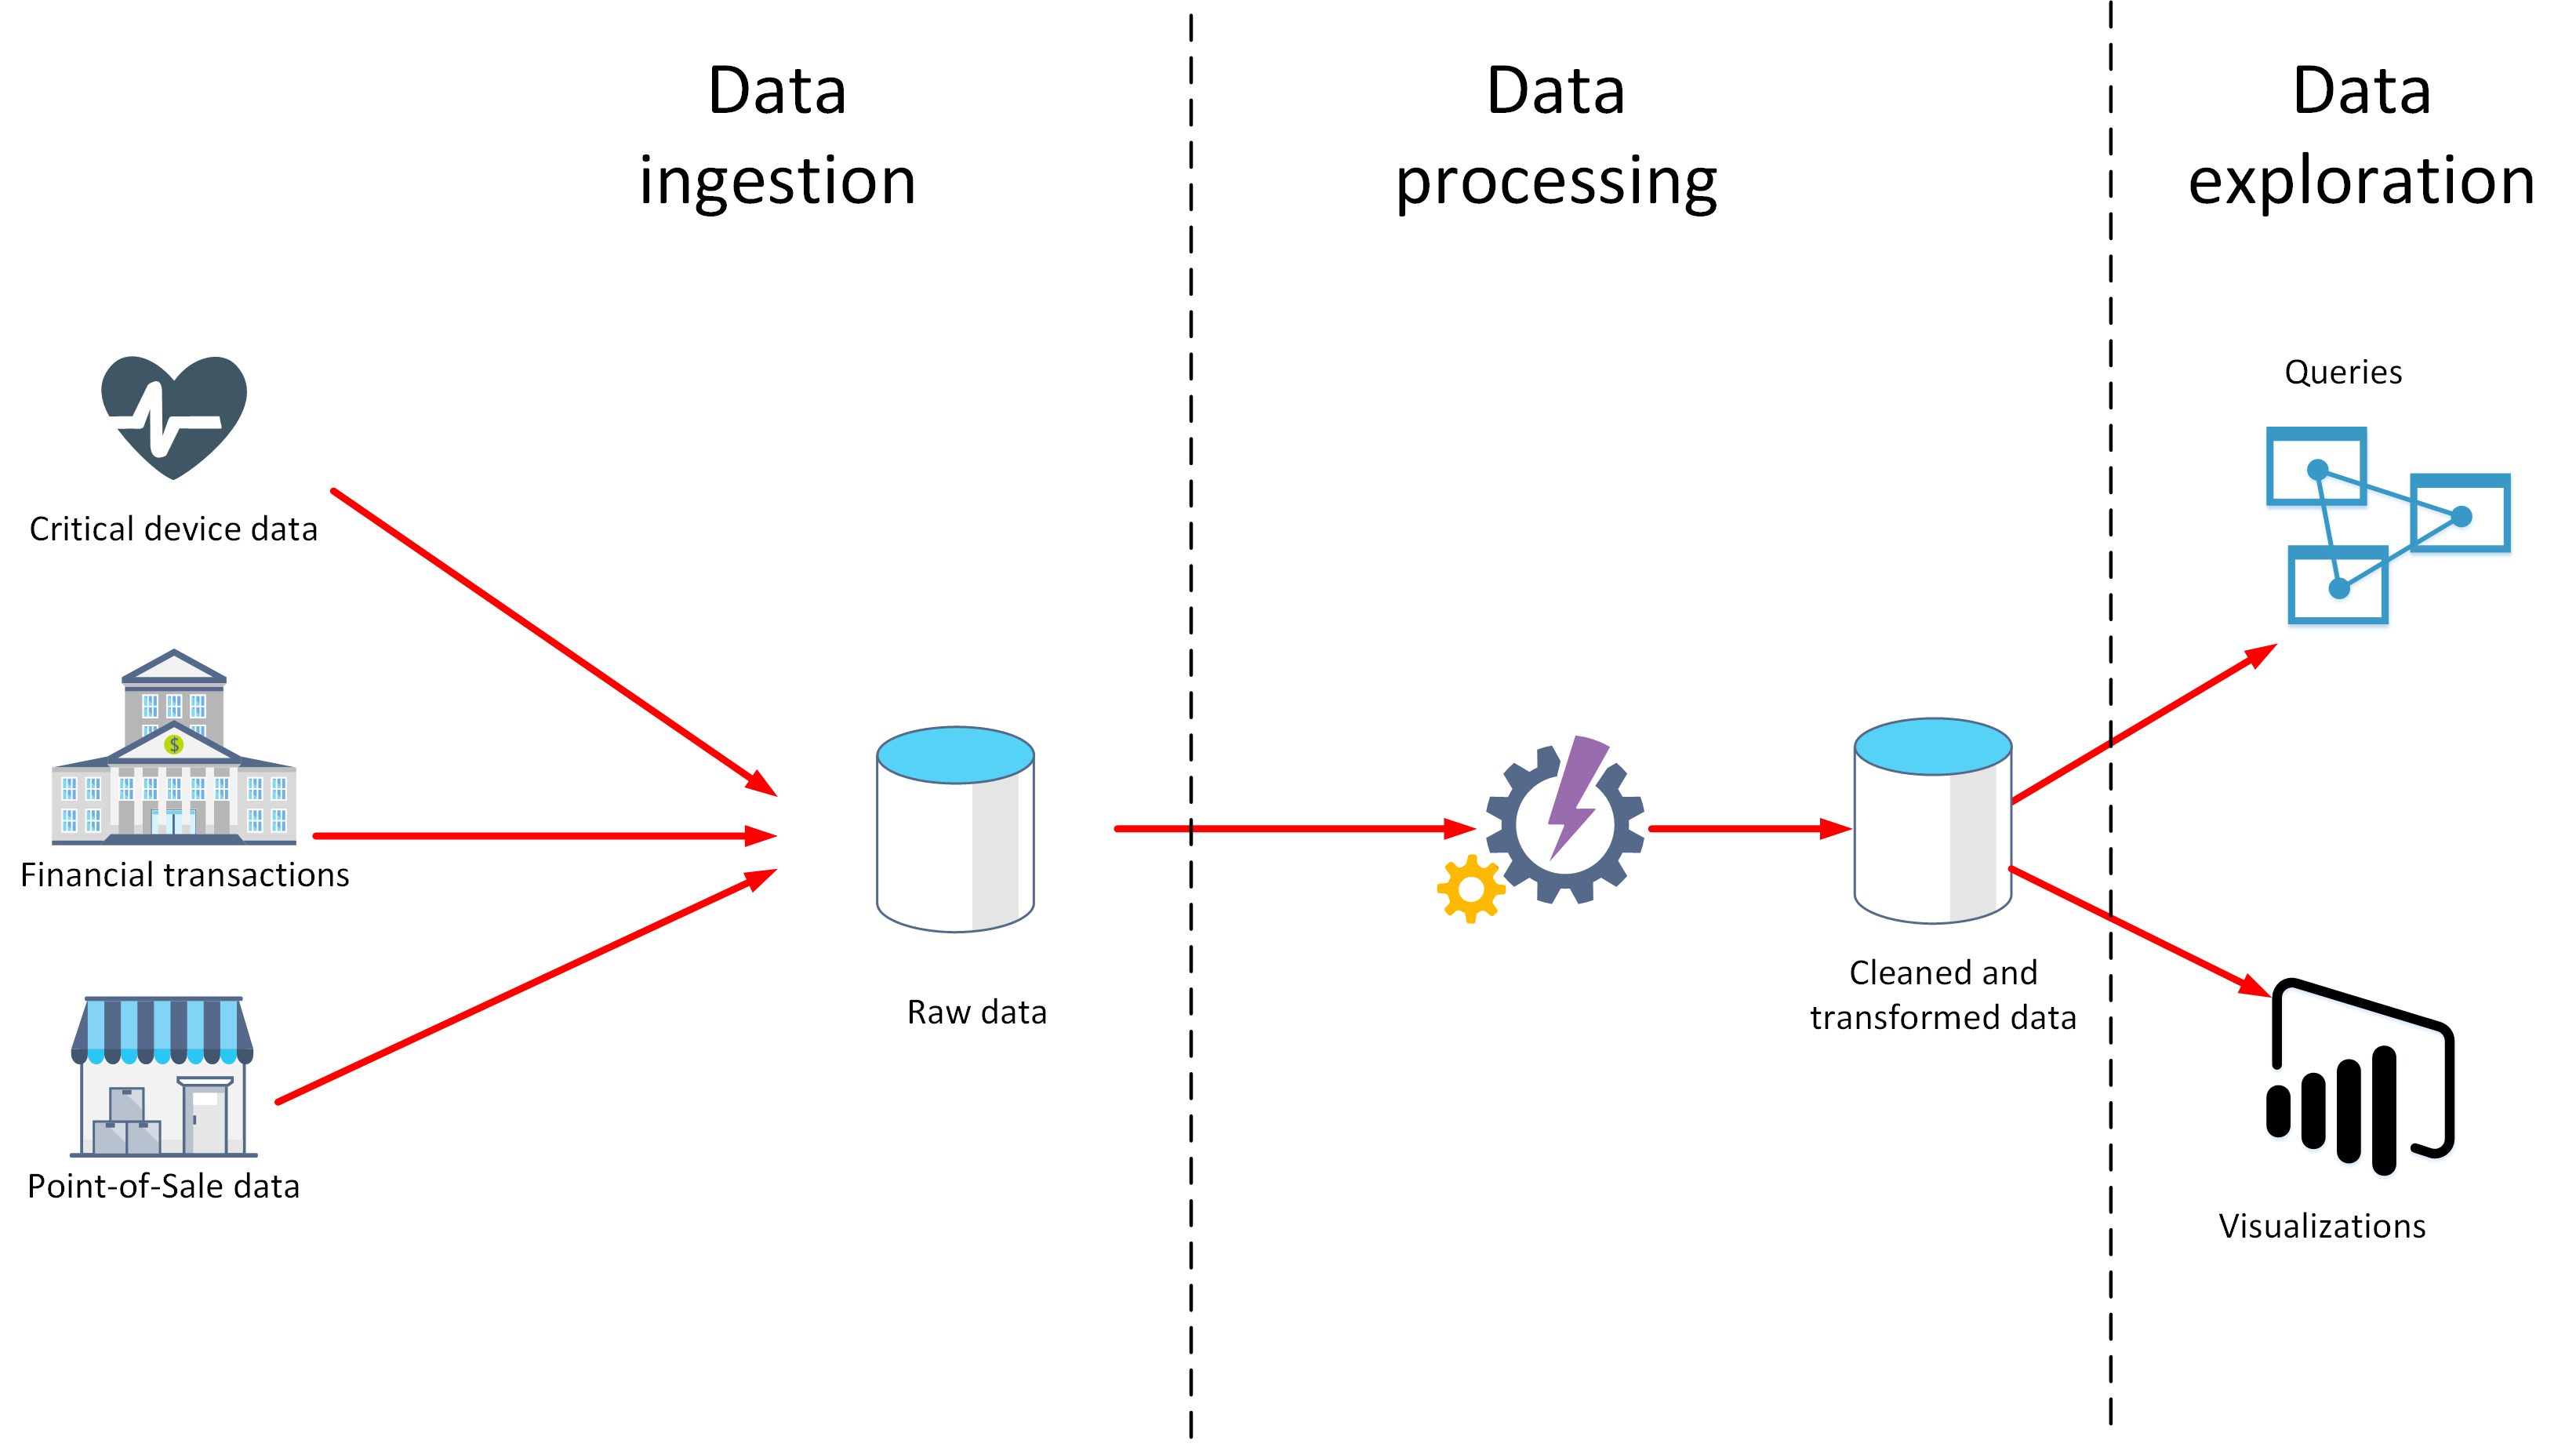 A typical data analytics architecture depicting data ingestion, processing, and exploration